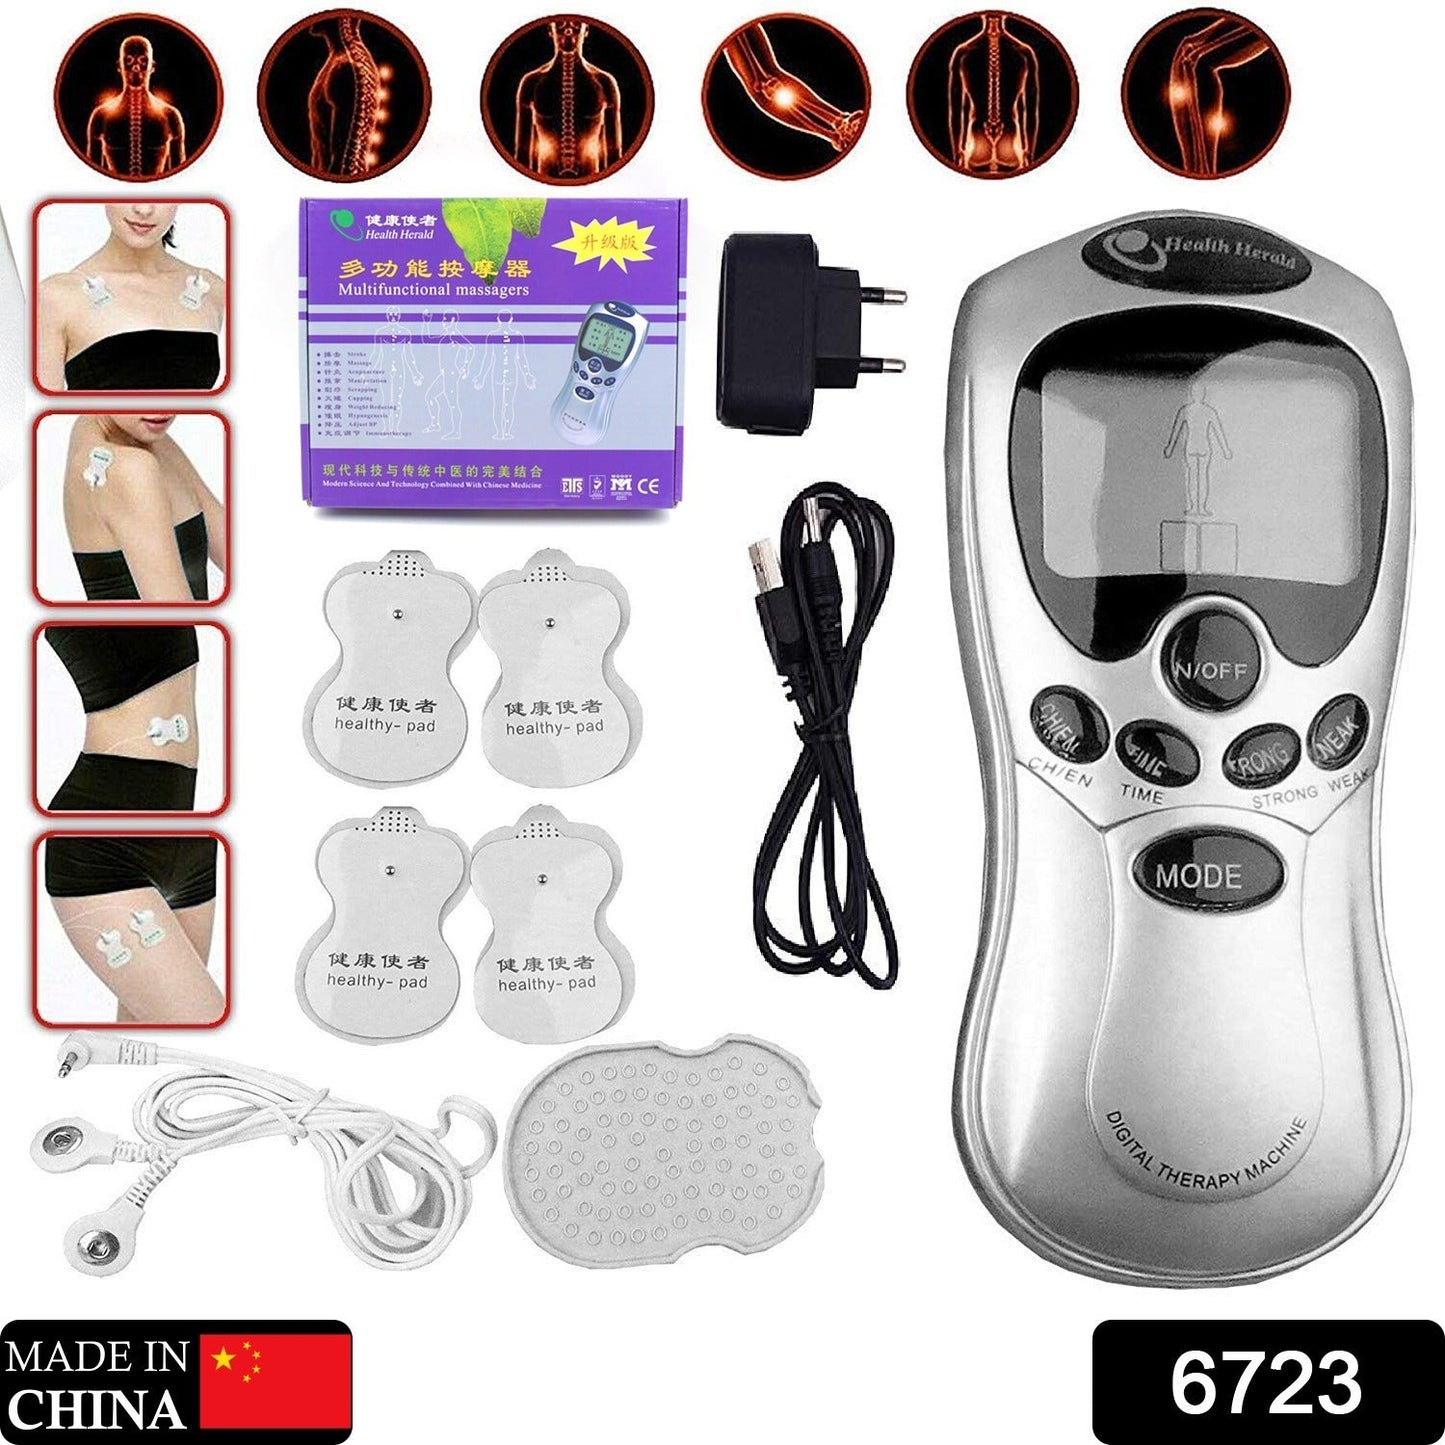 6723  Multifunctional Massager, Health Care Digital Chinese Meridian Tens Therapy Massager Relax Body Muscle Accupuncture Machine 4 Electrode Pads & Charger Adapter and Cable,  Physiotherapy, Electric Digital Therapy neck back Mane Massage